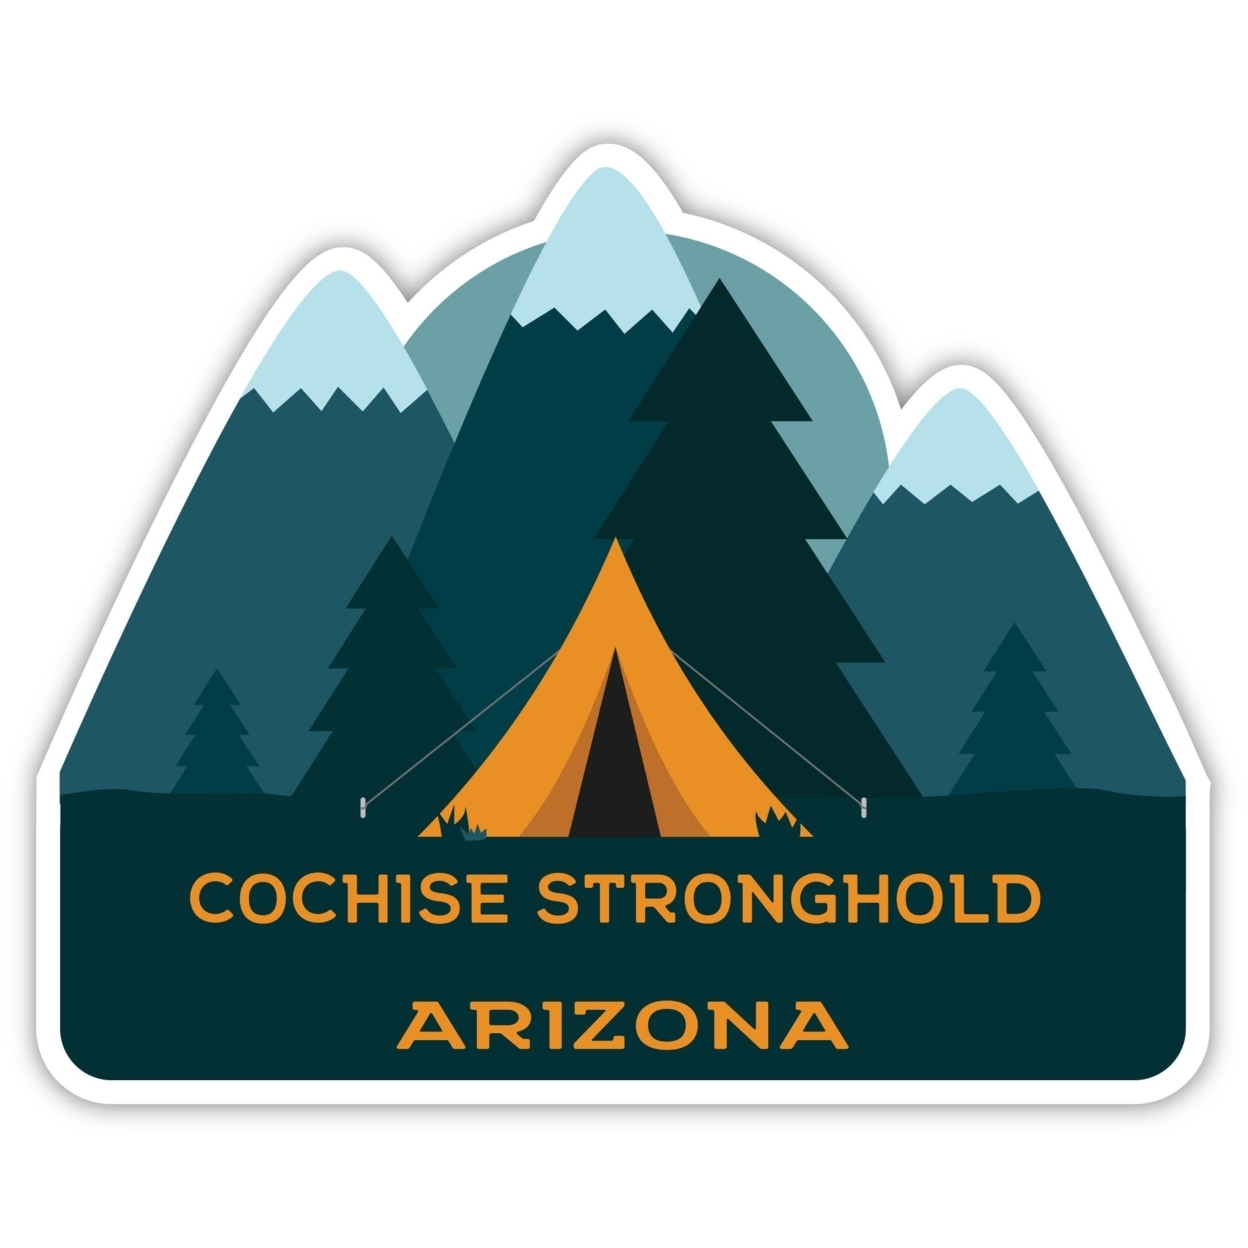 Cochise Stronghold Arizona Souvenir Decorative Stickers (Choose Theme And Size) - 4-Pack, 12-Inch, Tent